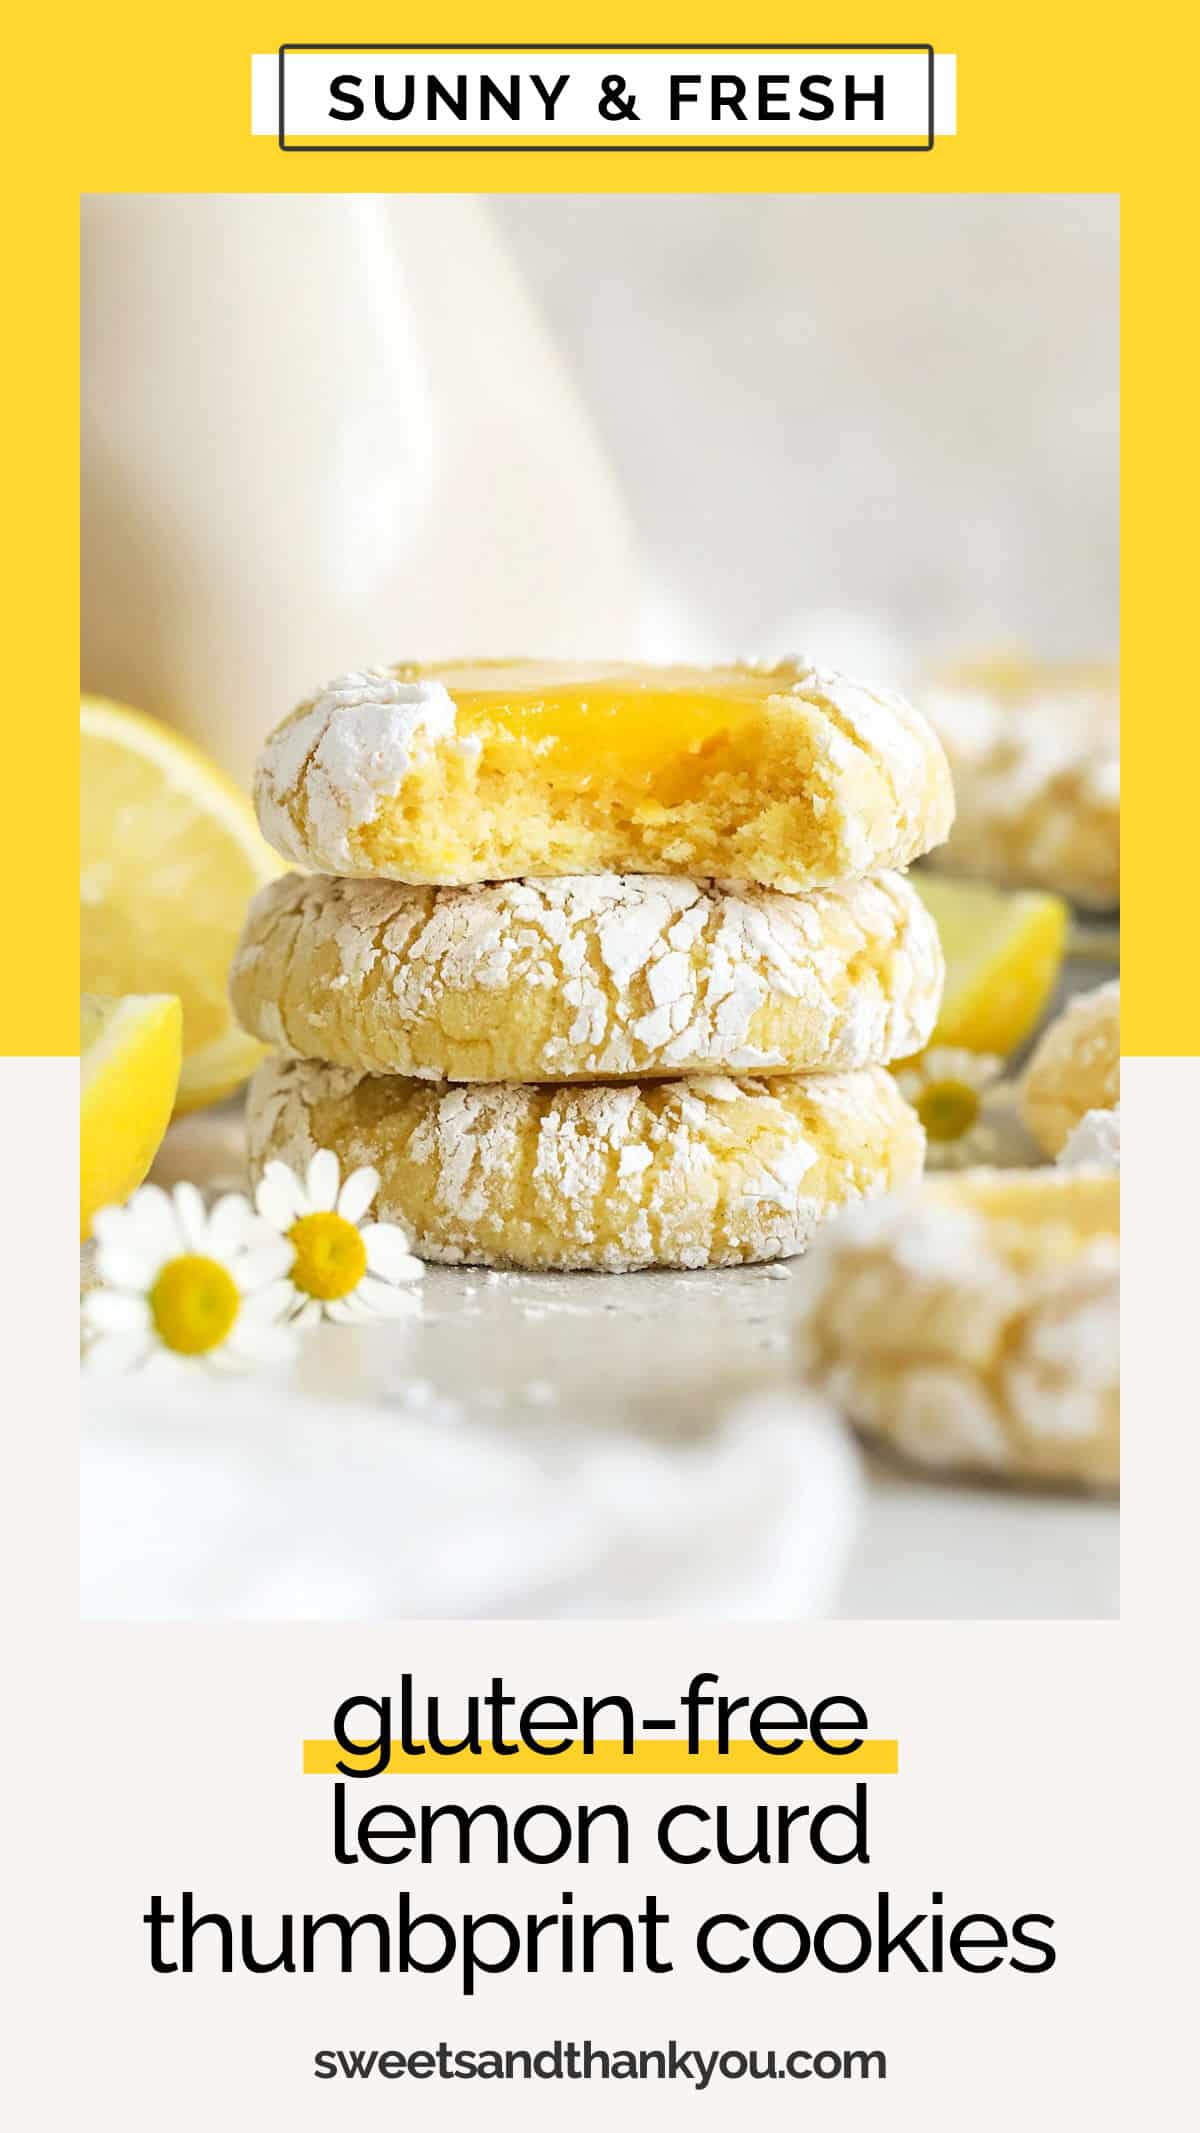 These gluten-free Lemon Thumbprint Cookies are made with a soft lemon crinkle cookie base and a dollop of homemade lemon curd filling for a double-dose of lemon goodness! They're the gluten-free lemon cookie recipe MADE for lemon lovers! We love them in the spring & summer or for the holidays. 